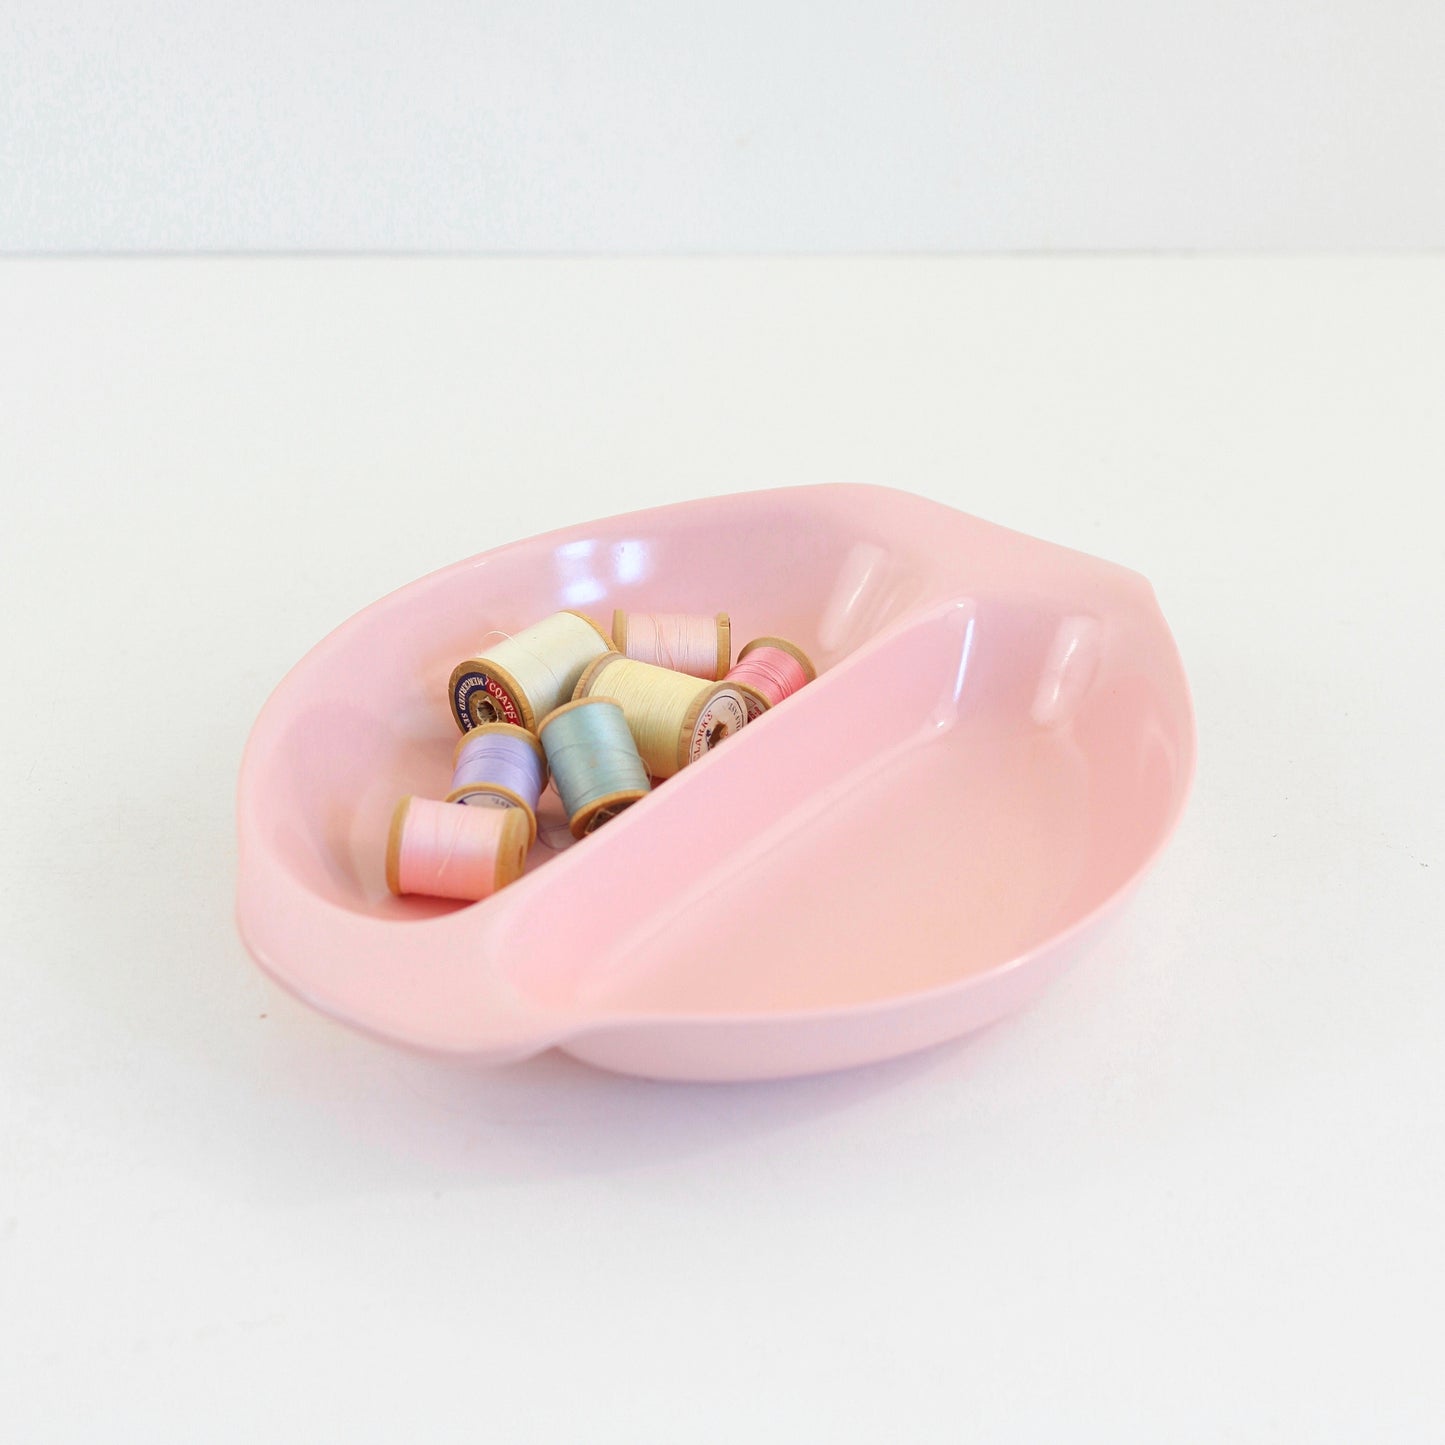 SOLD - 1950s Pink Melmac Divided Bowl by Russel Wright